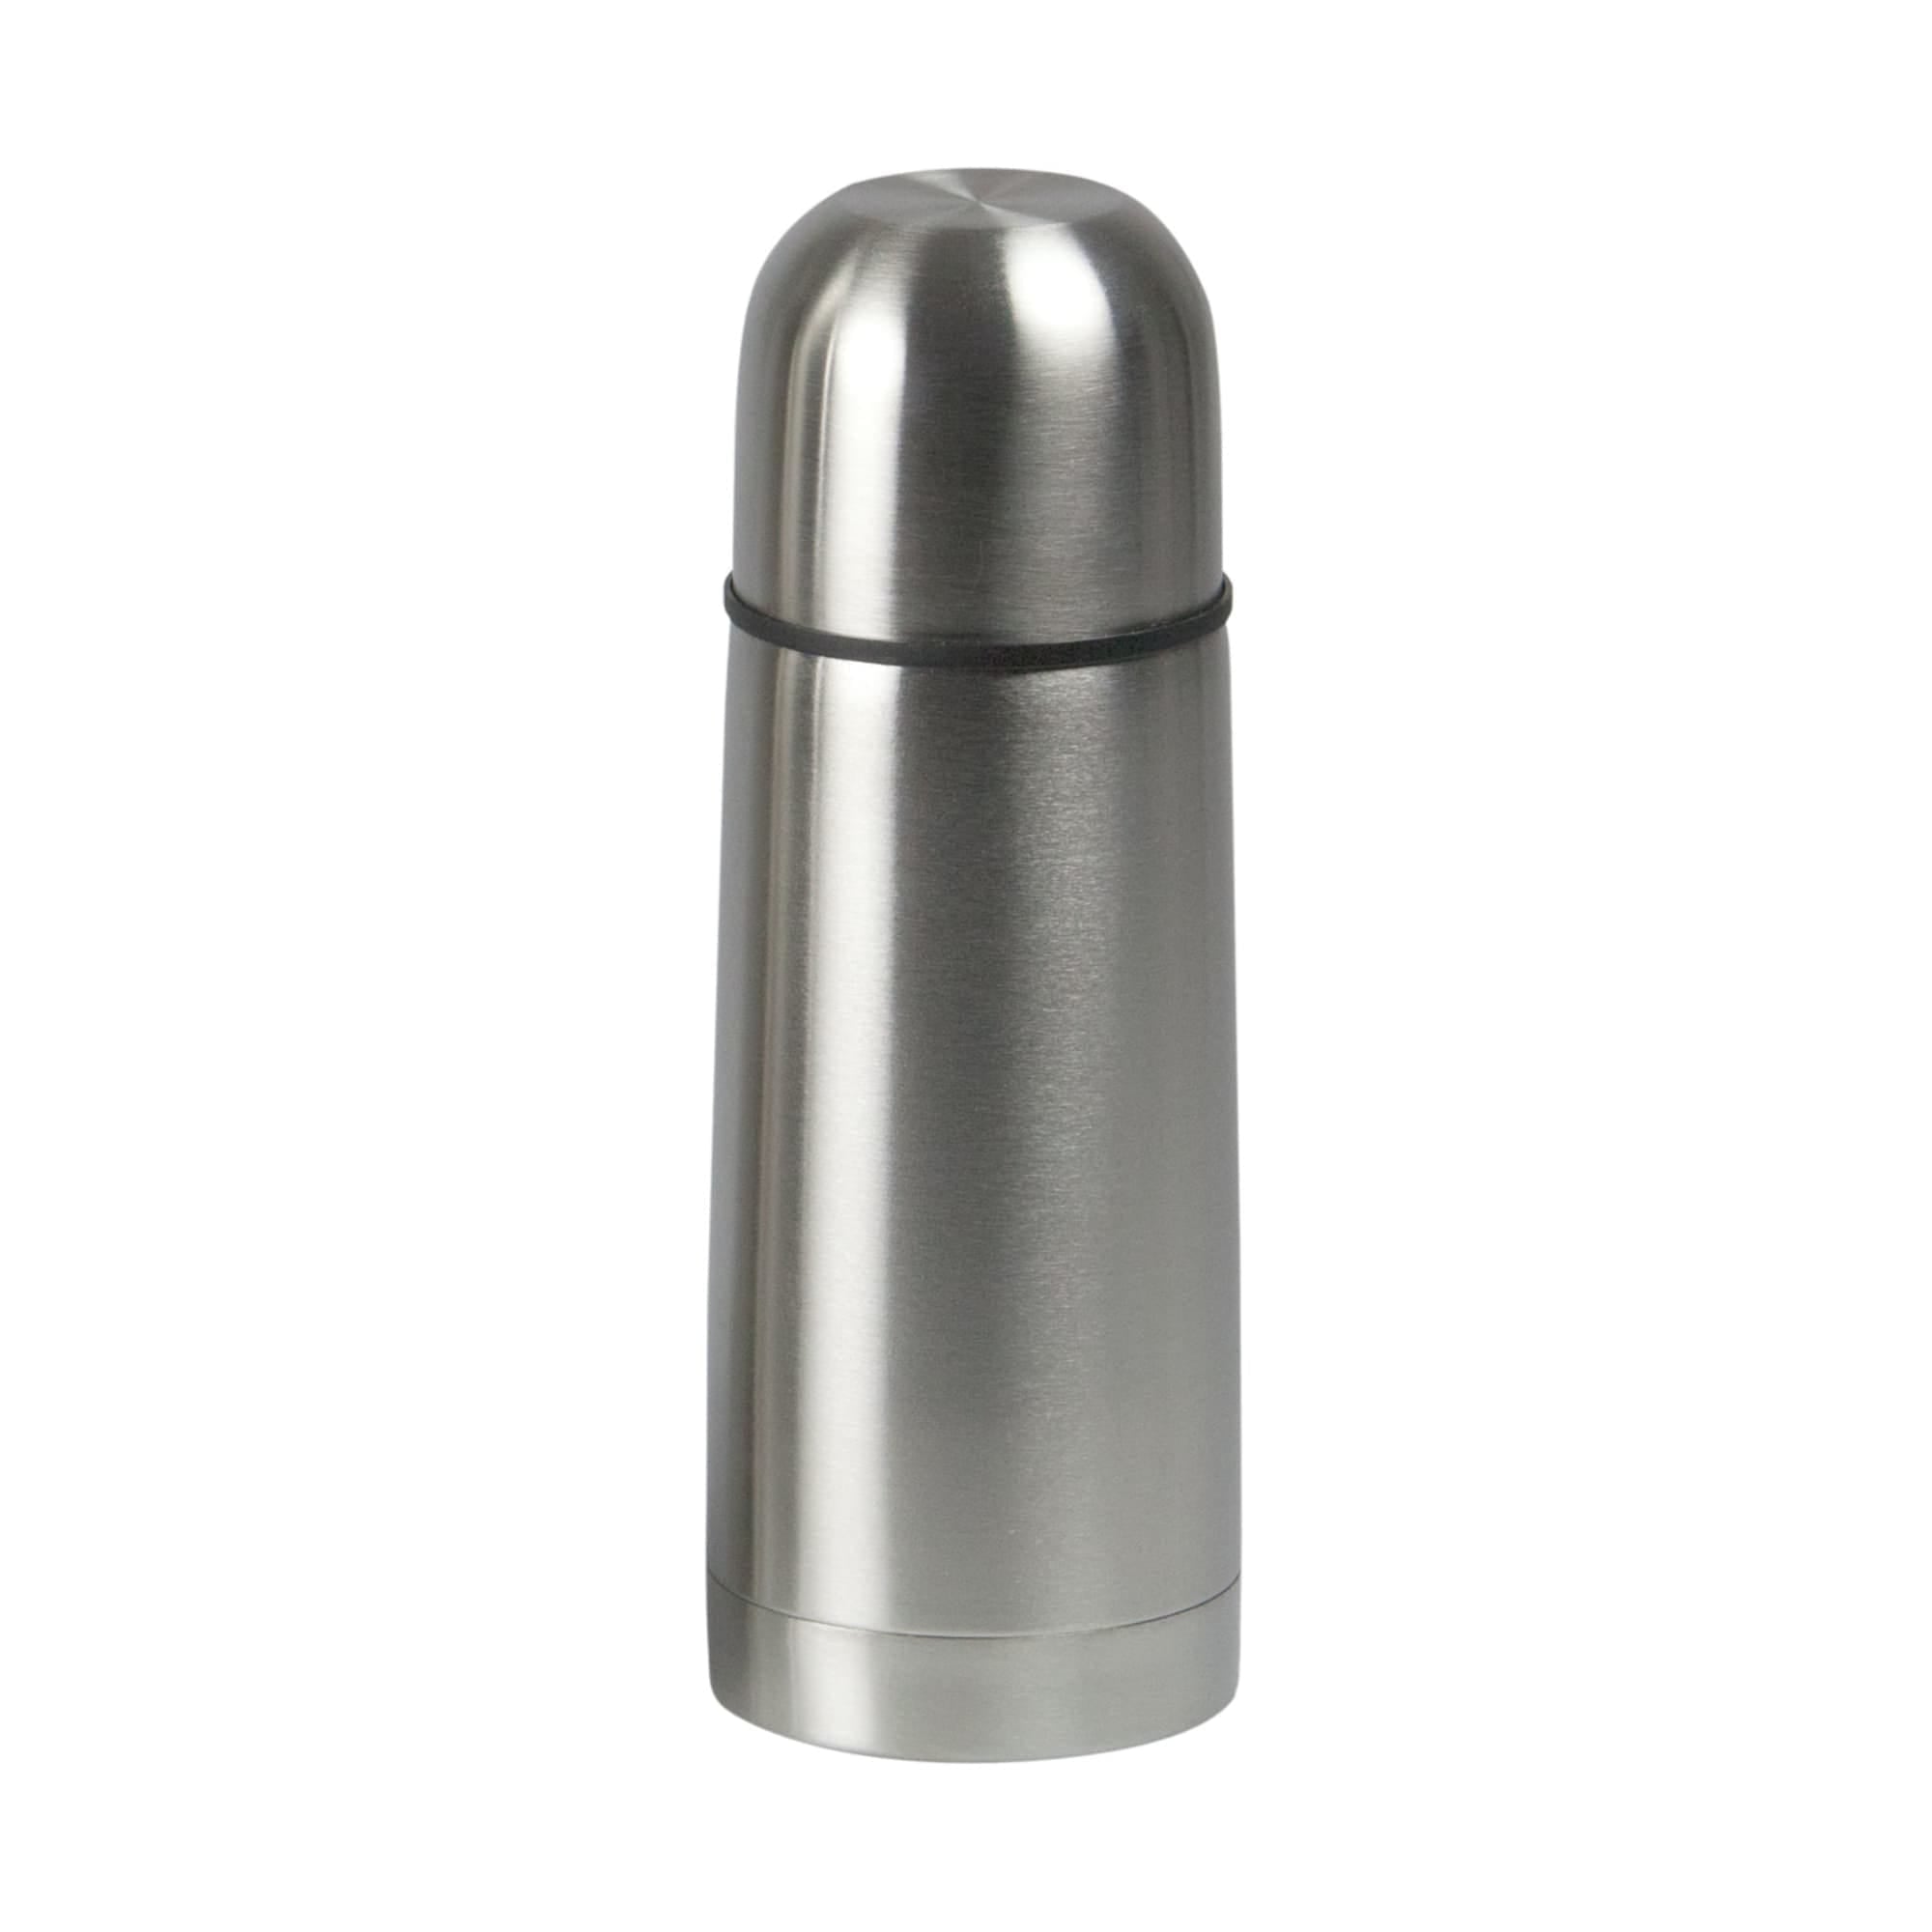 Home Basics 16.9 oz. Stainless Steel Bullet Vaccum Flask, Silver $5.00 EACH, CASE PACK OF 12